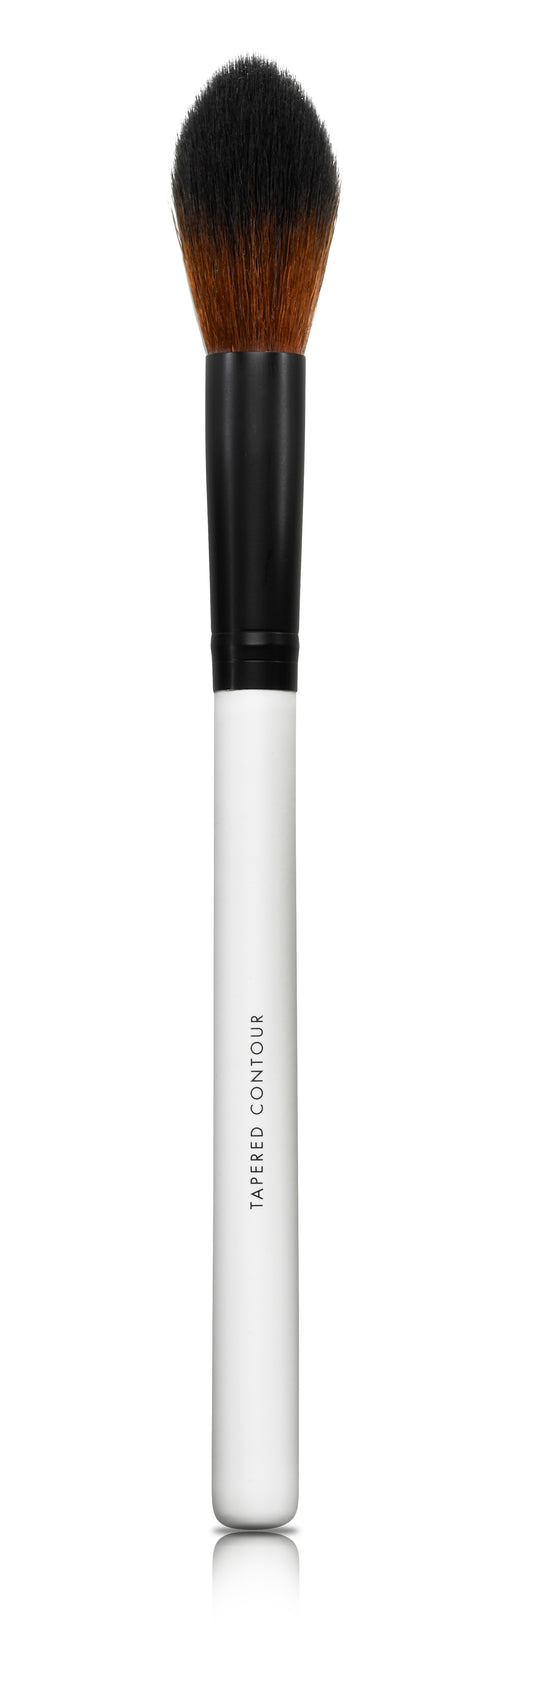 LILY LOLO - Tapered Contour Brush - 1st